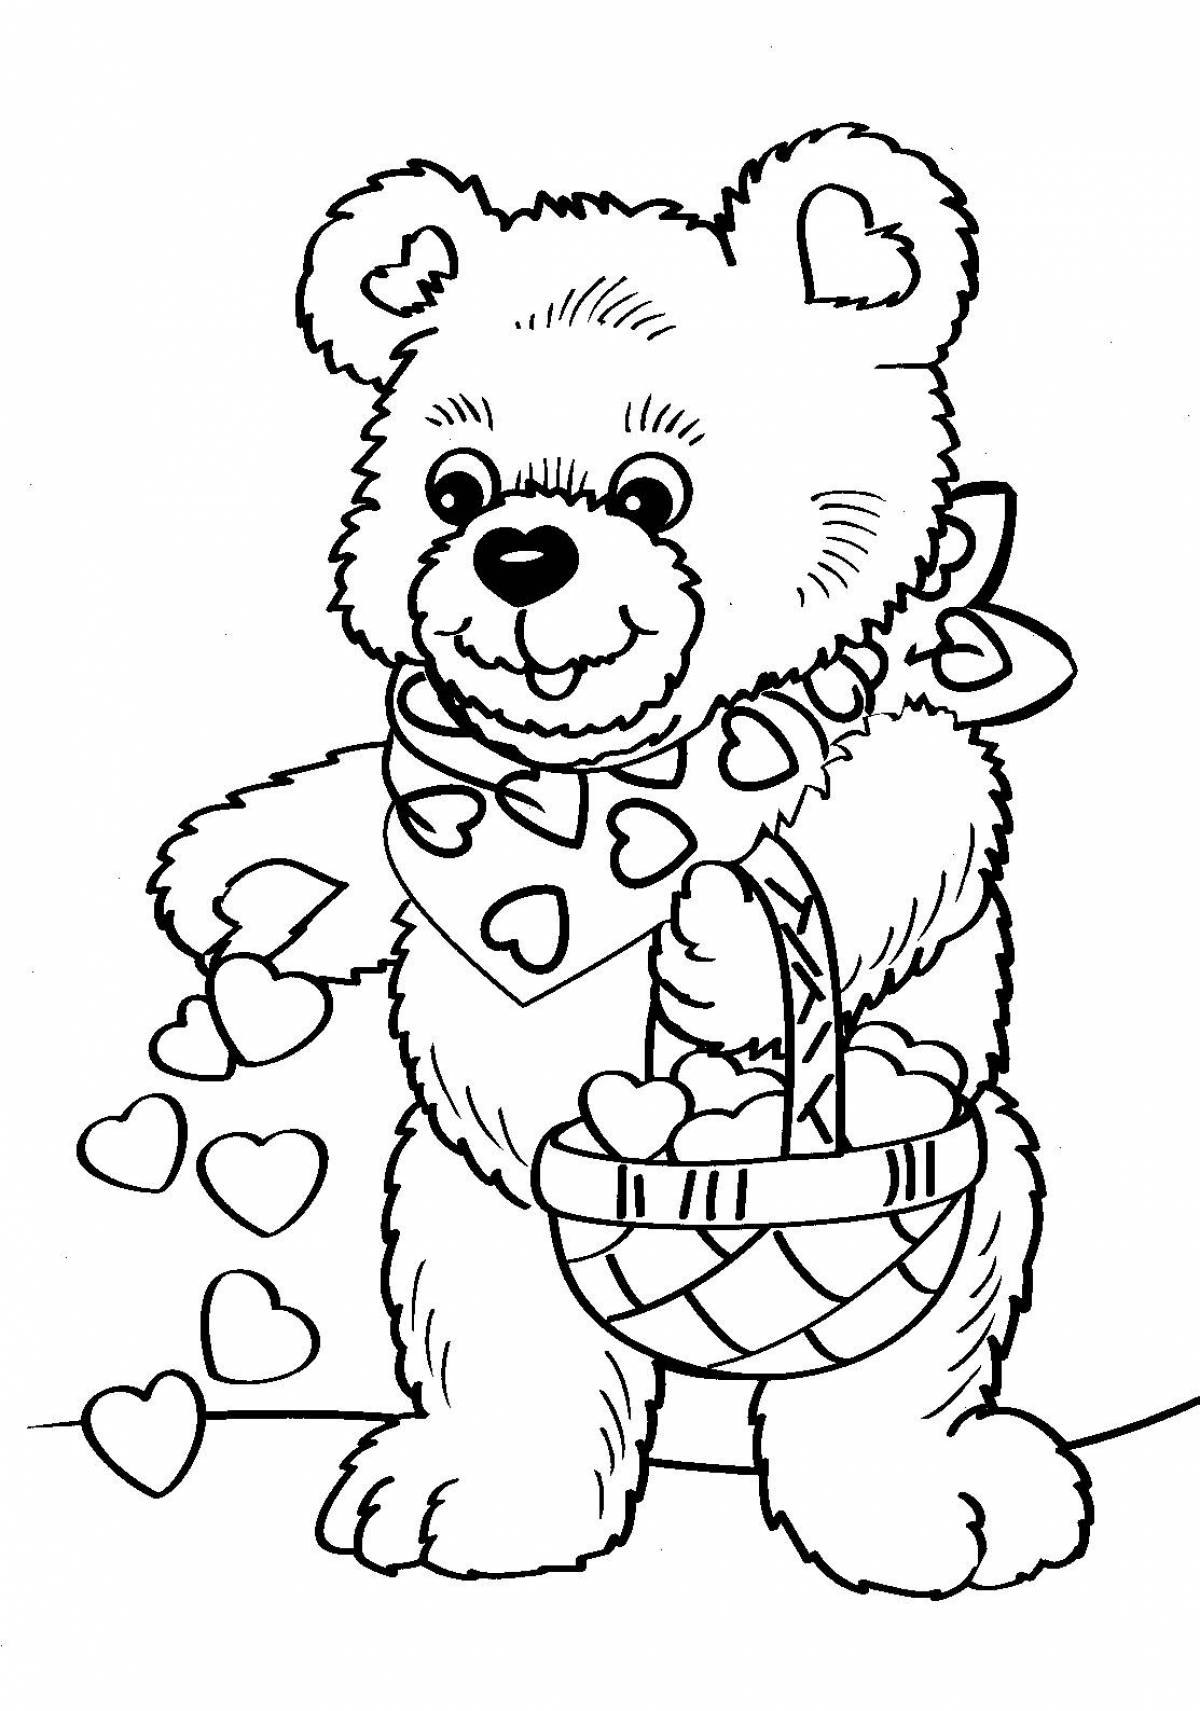 Coloring page giggling bear cub